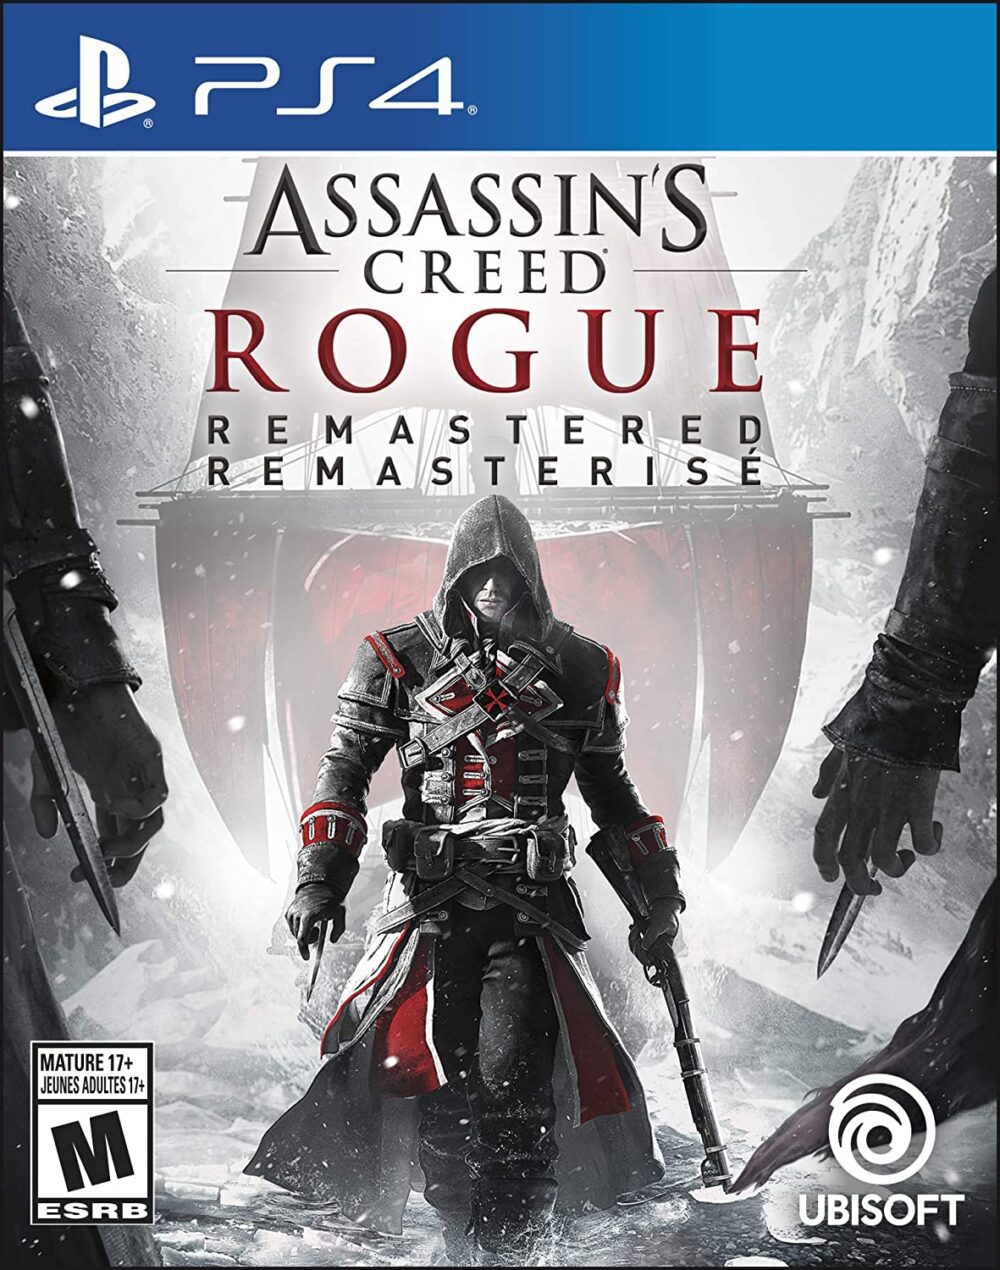 Assassin's Creed Rogue Remastered for PS4